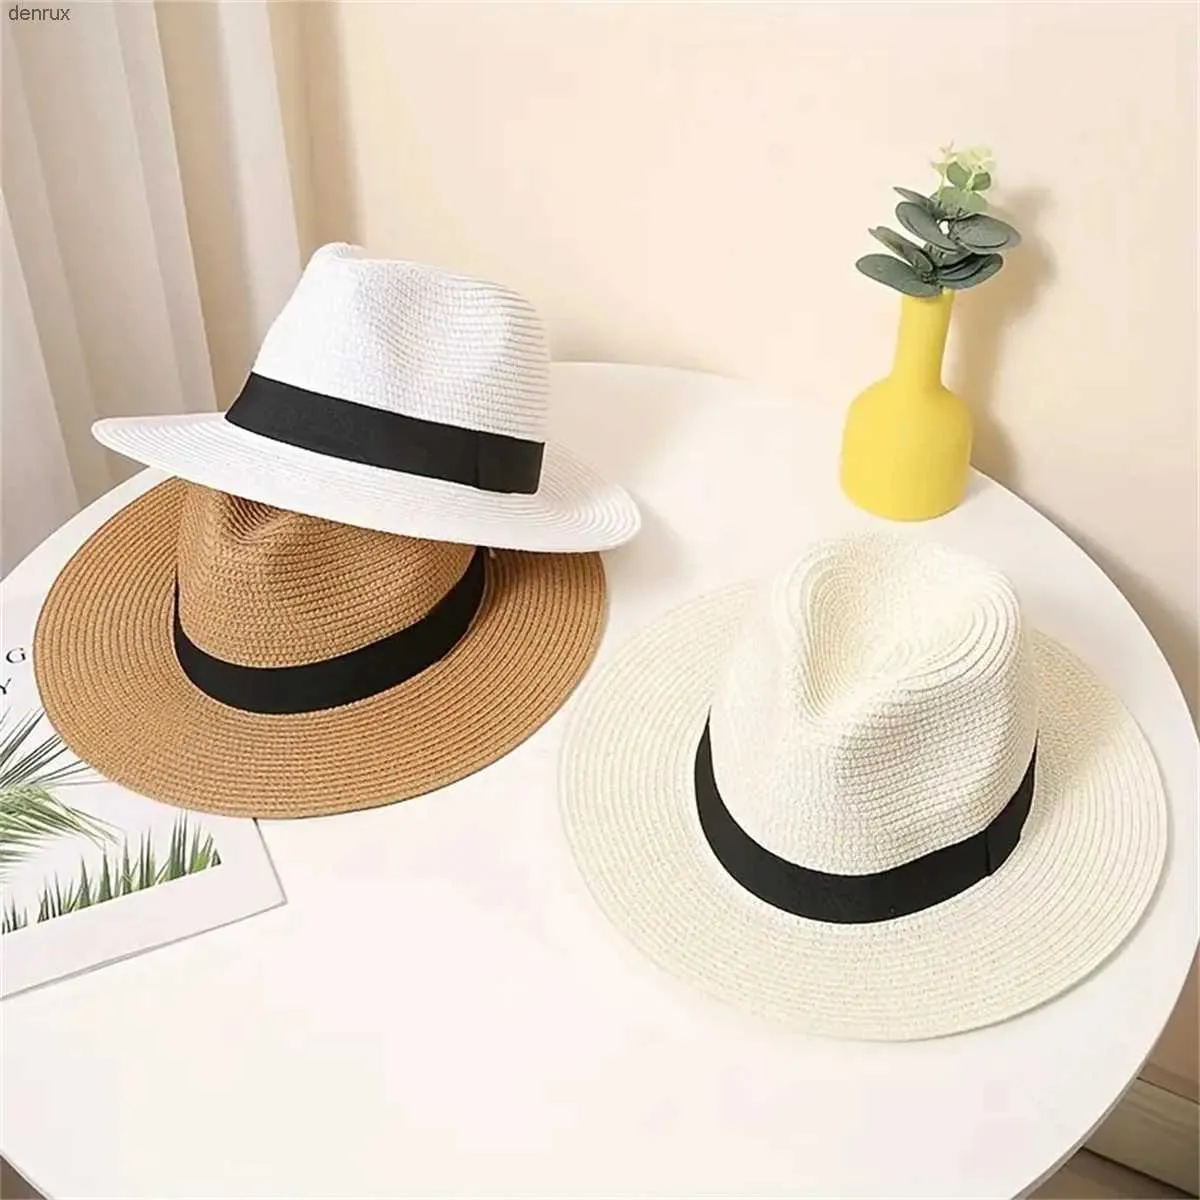 Wide Brim Hats Bucket Hats Classic Unisex Straw Hat Solid Color British Style Panama Hats BreathableSun Hats Outdoor Travel Beach Hat For Women MenL240413